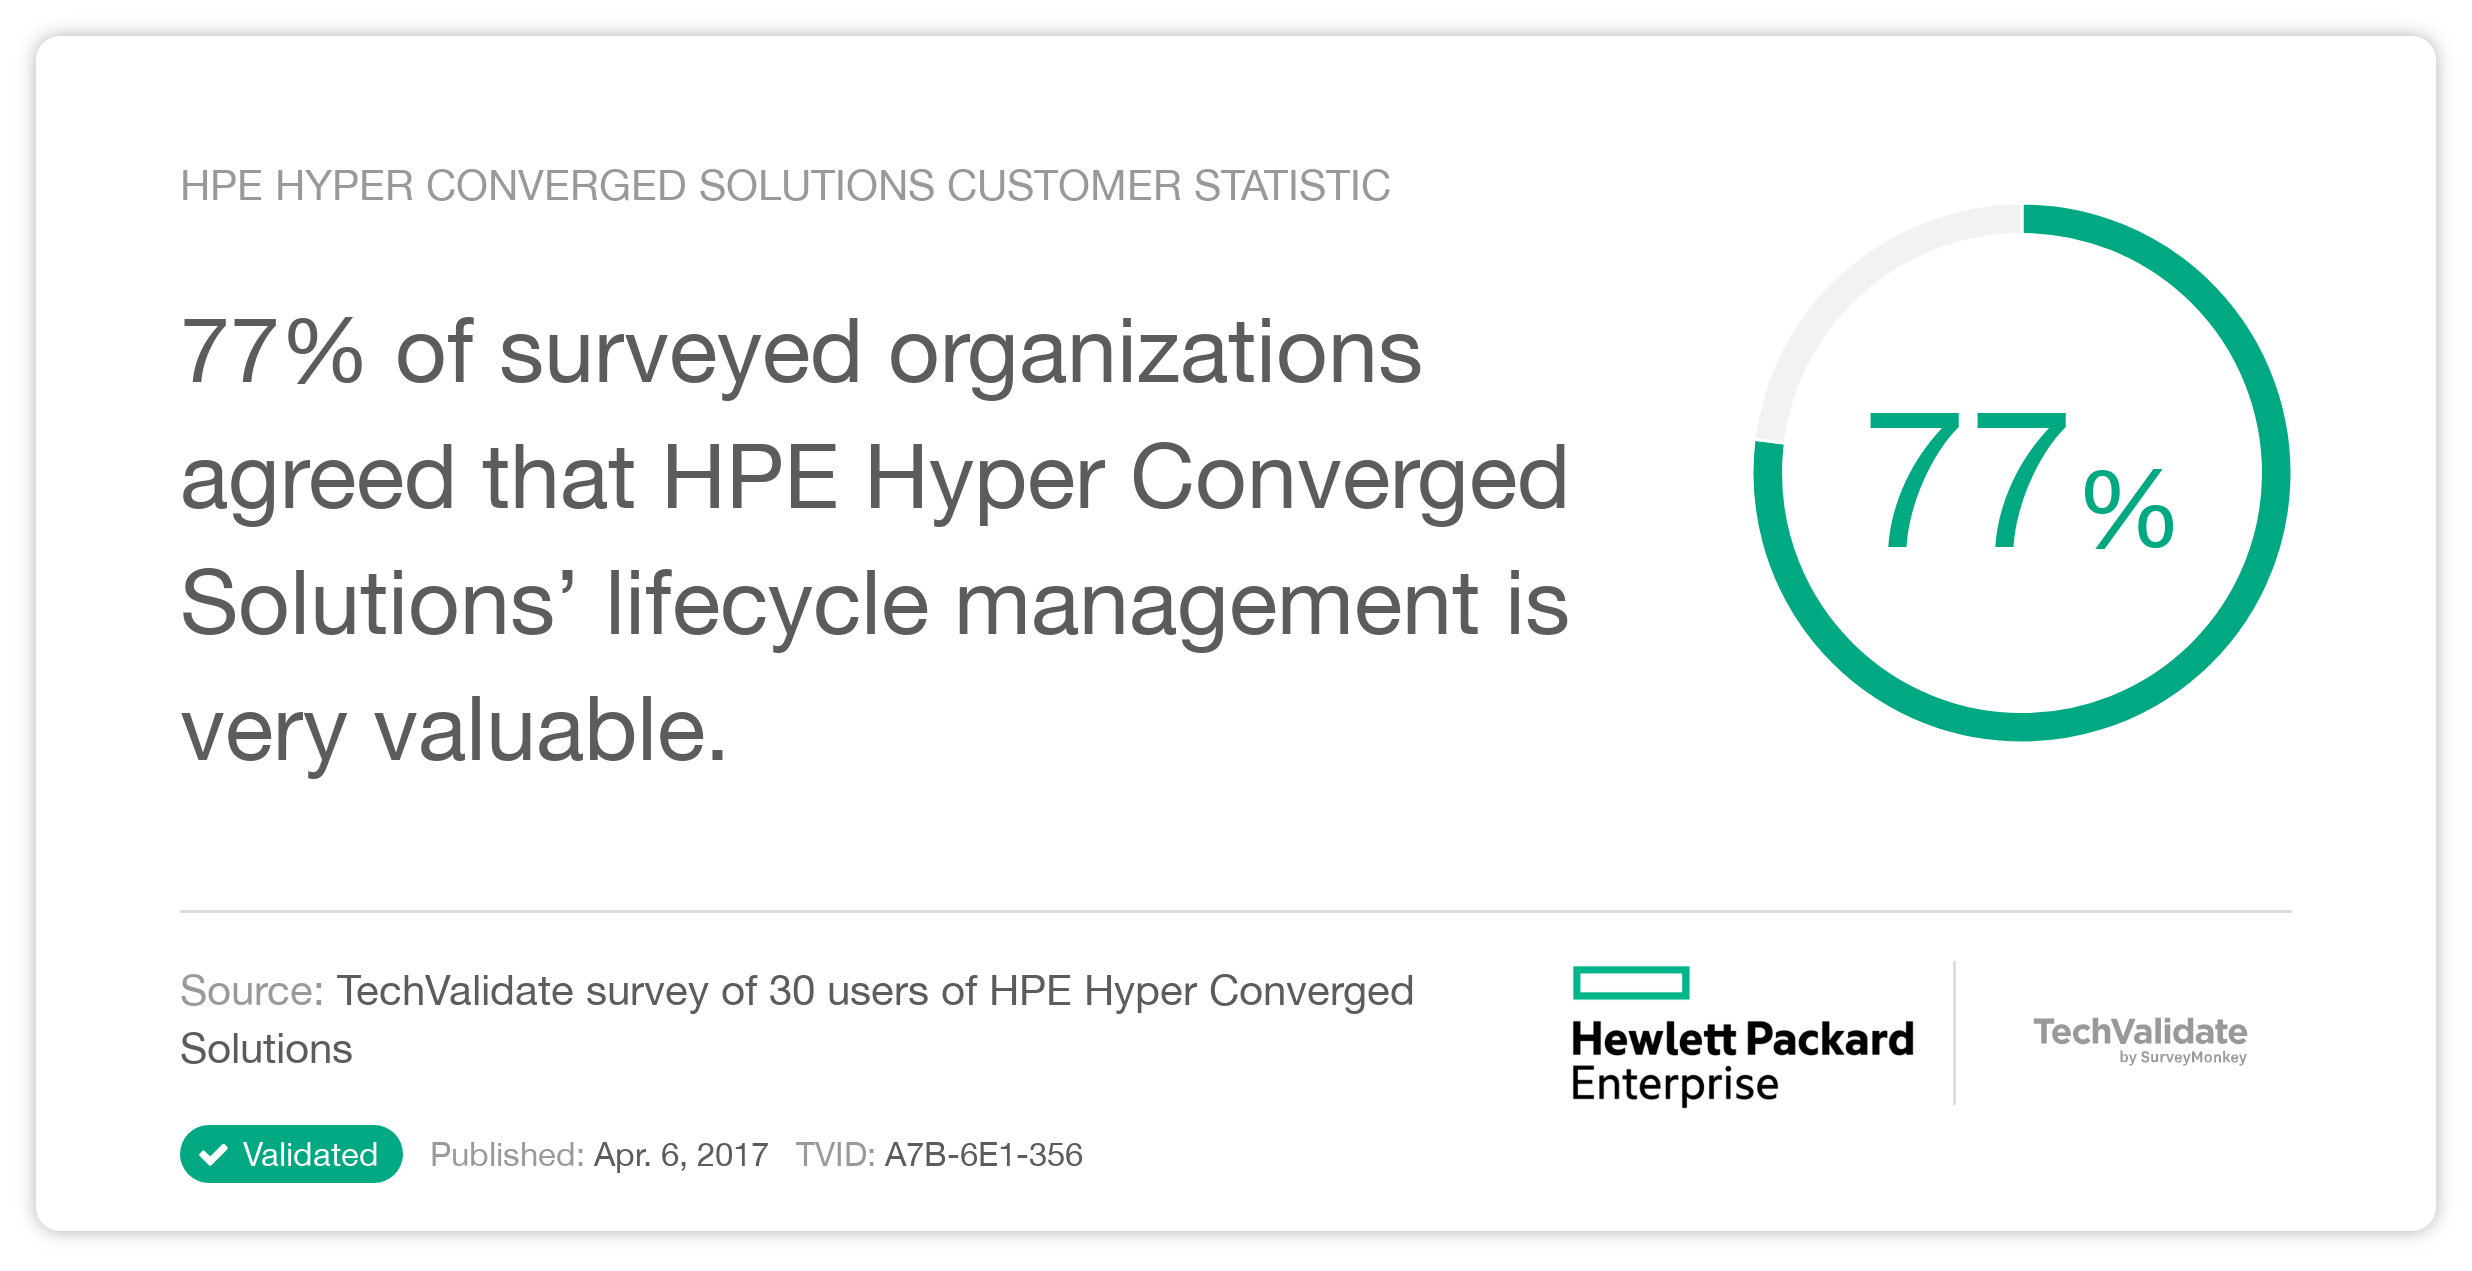 HPE Hyper Converged Solutions Customer Statistic